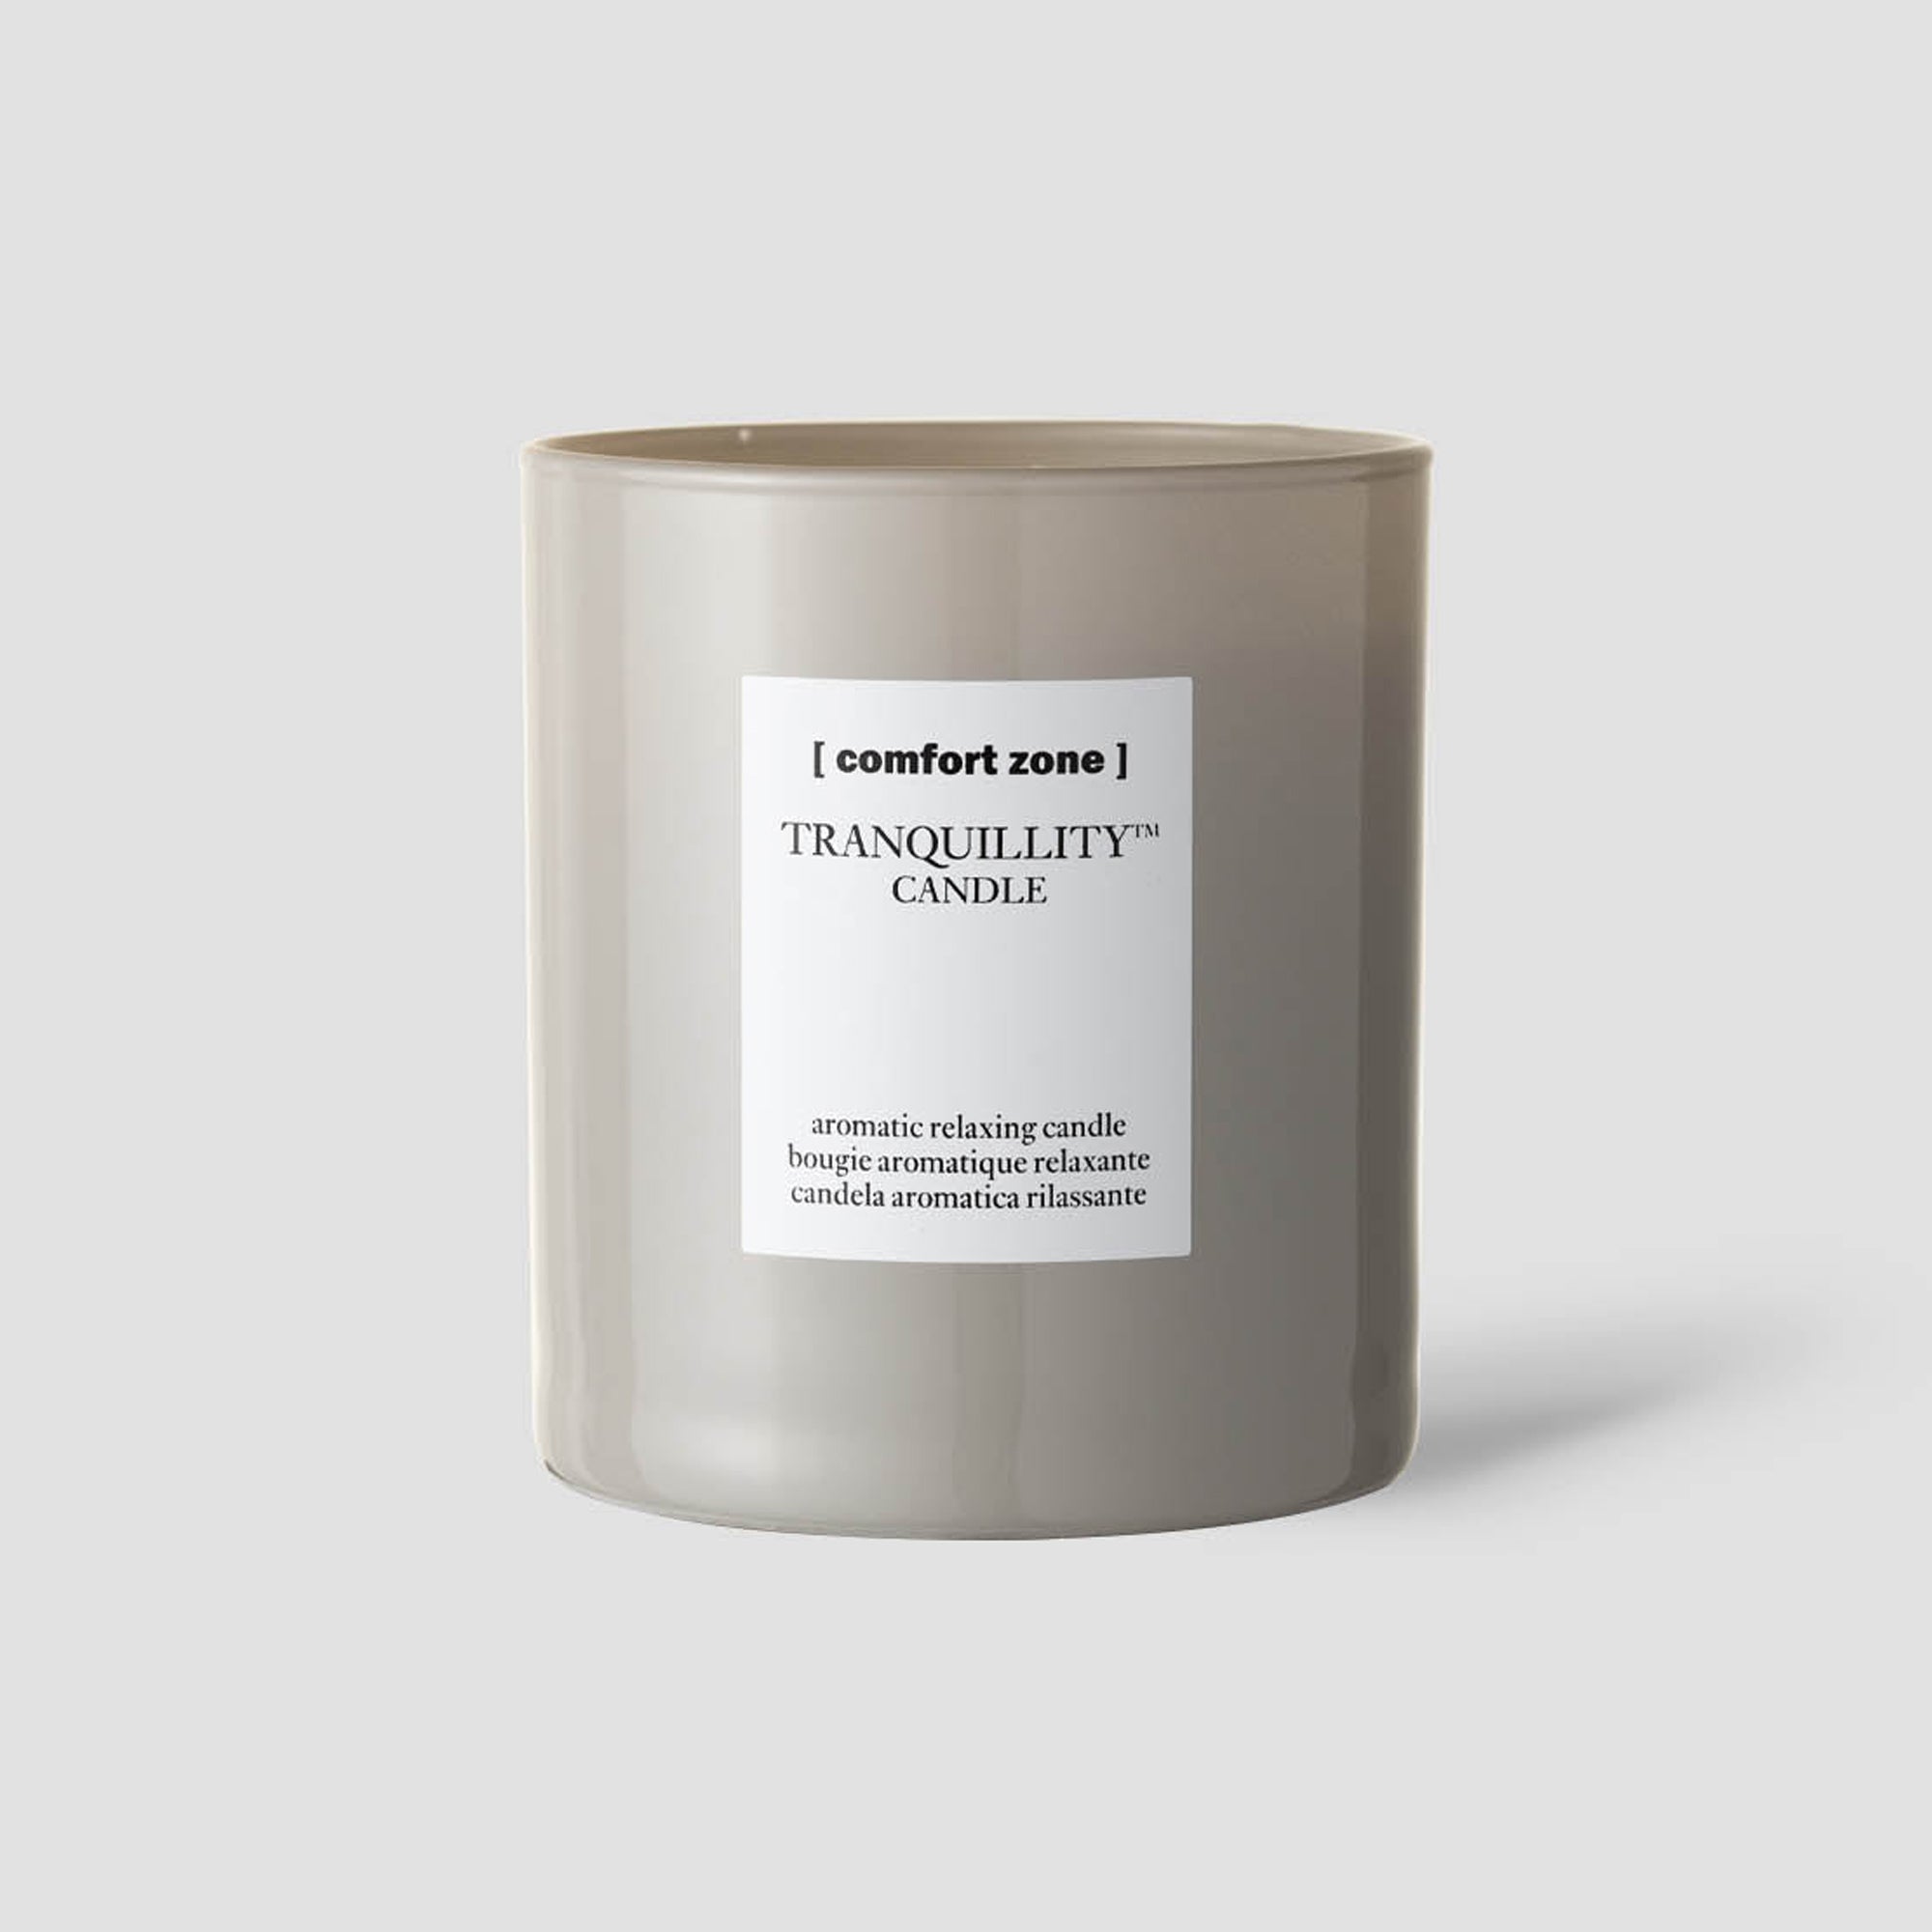 Tranquillity™ Candle (Calming Candle) - 280gr - [ comfort zone ]